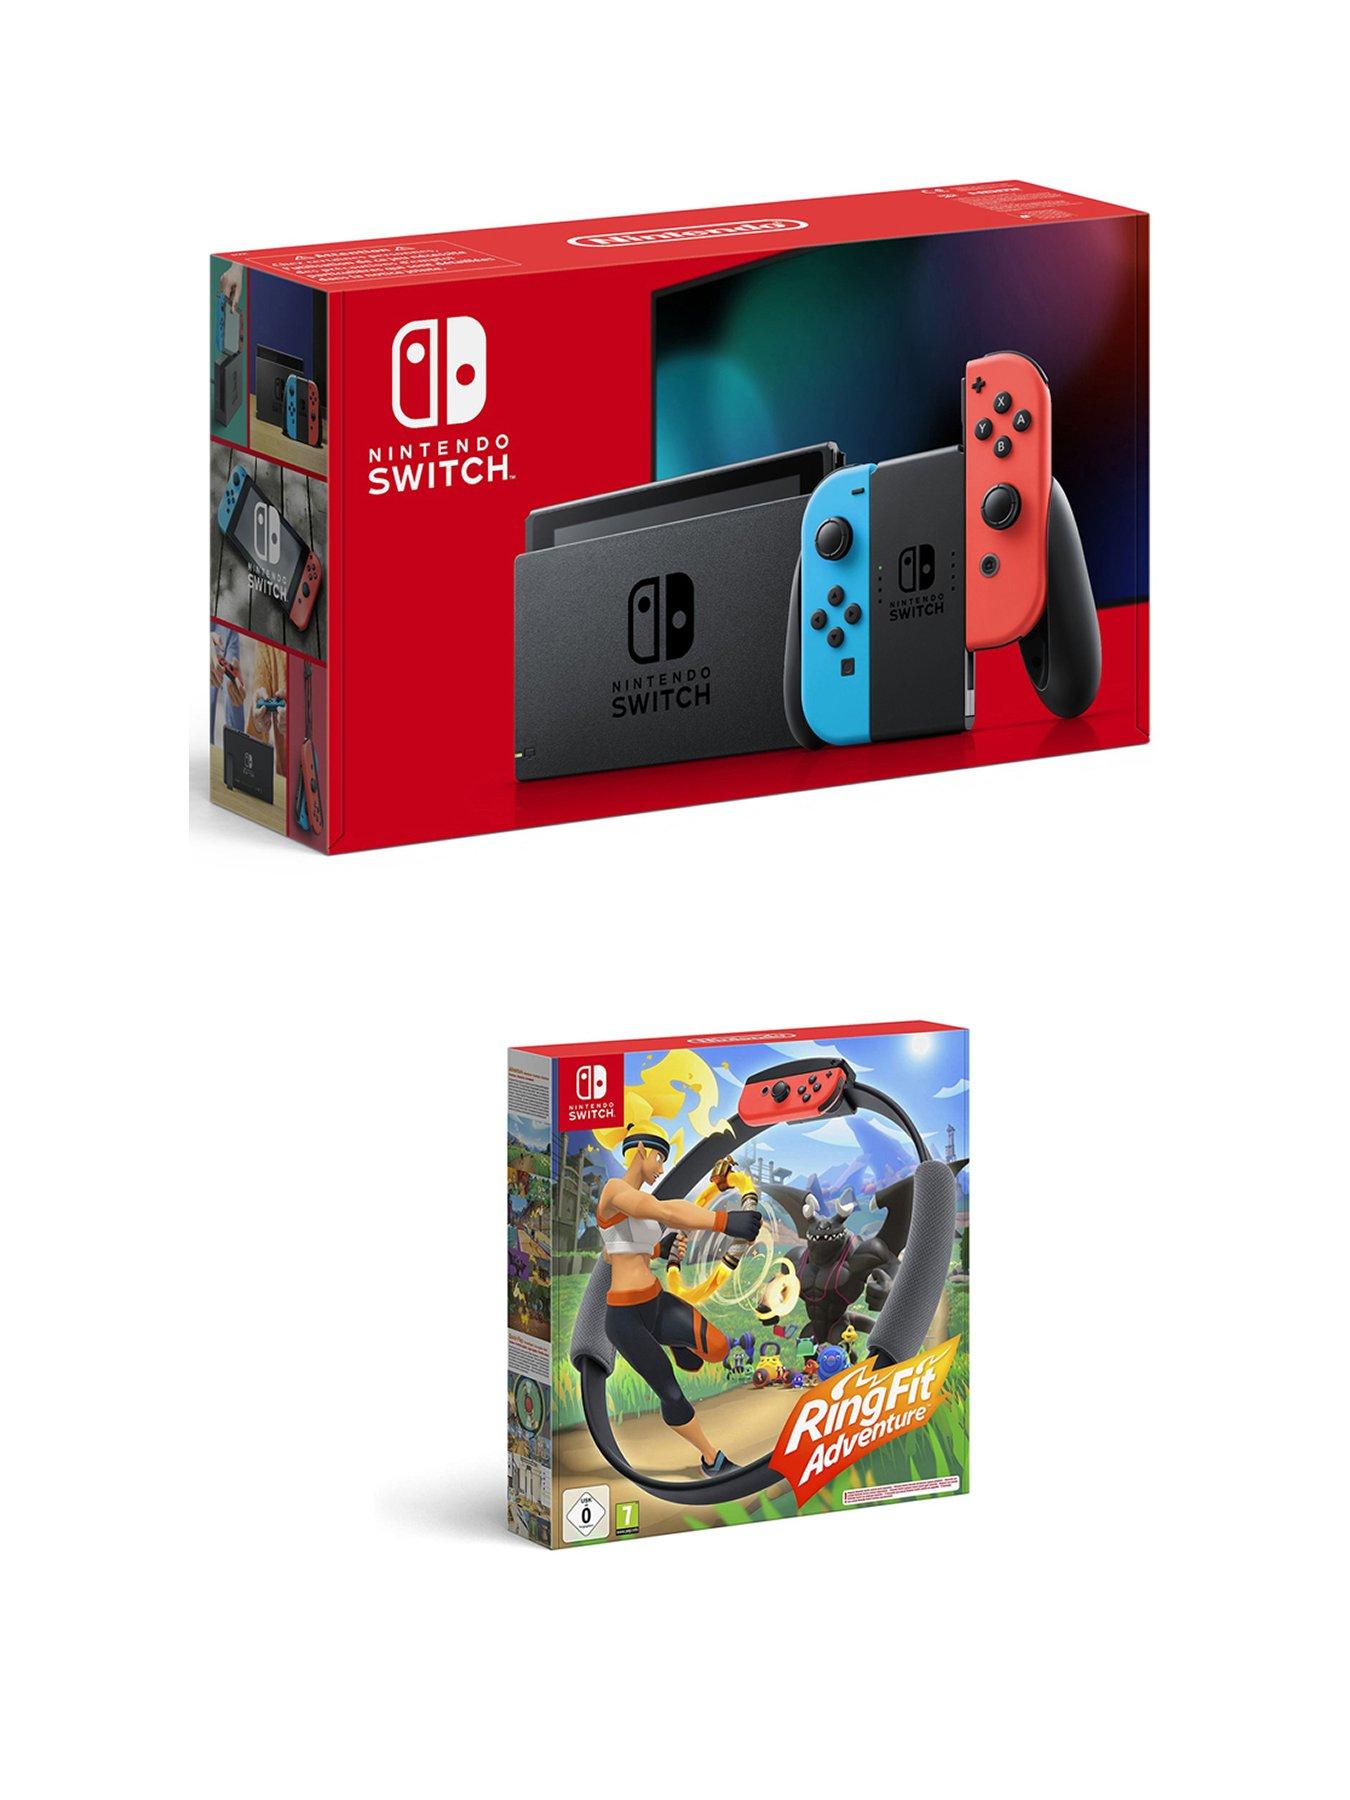 Nintendo Switch Exclusive Ring Fit Adventure & Neon Switch Console Bundle -  Neon Red and Blue Joy-Con Switch Console, Dock, Ring Fit Full Game,  Ring-Con, Leg Strap and Accessories 